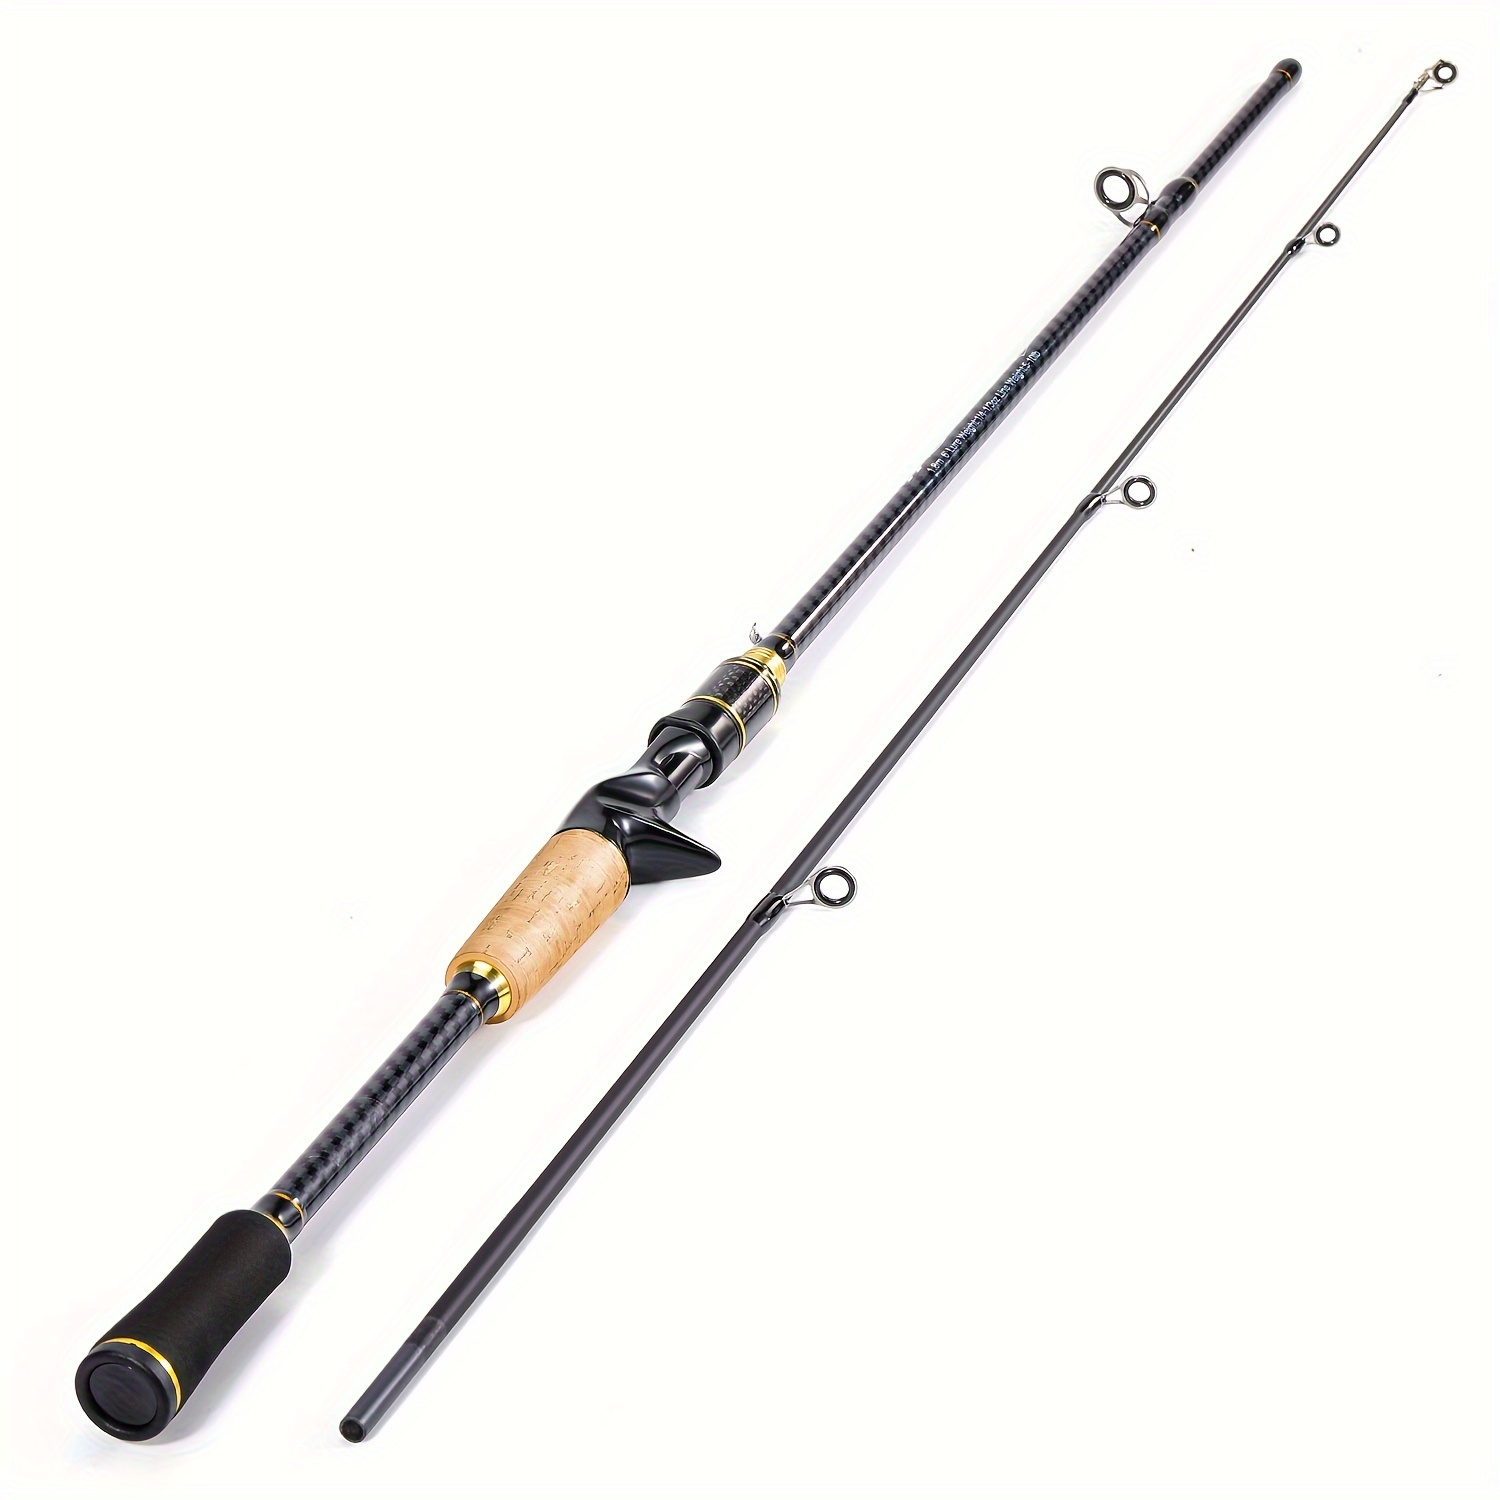 Sougayilang Fishing Rod, 180cm/70.86in Fishing Pole, Carbon Fiber Fishing  Rod For Freshwater And Saltwater